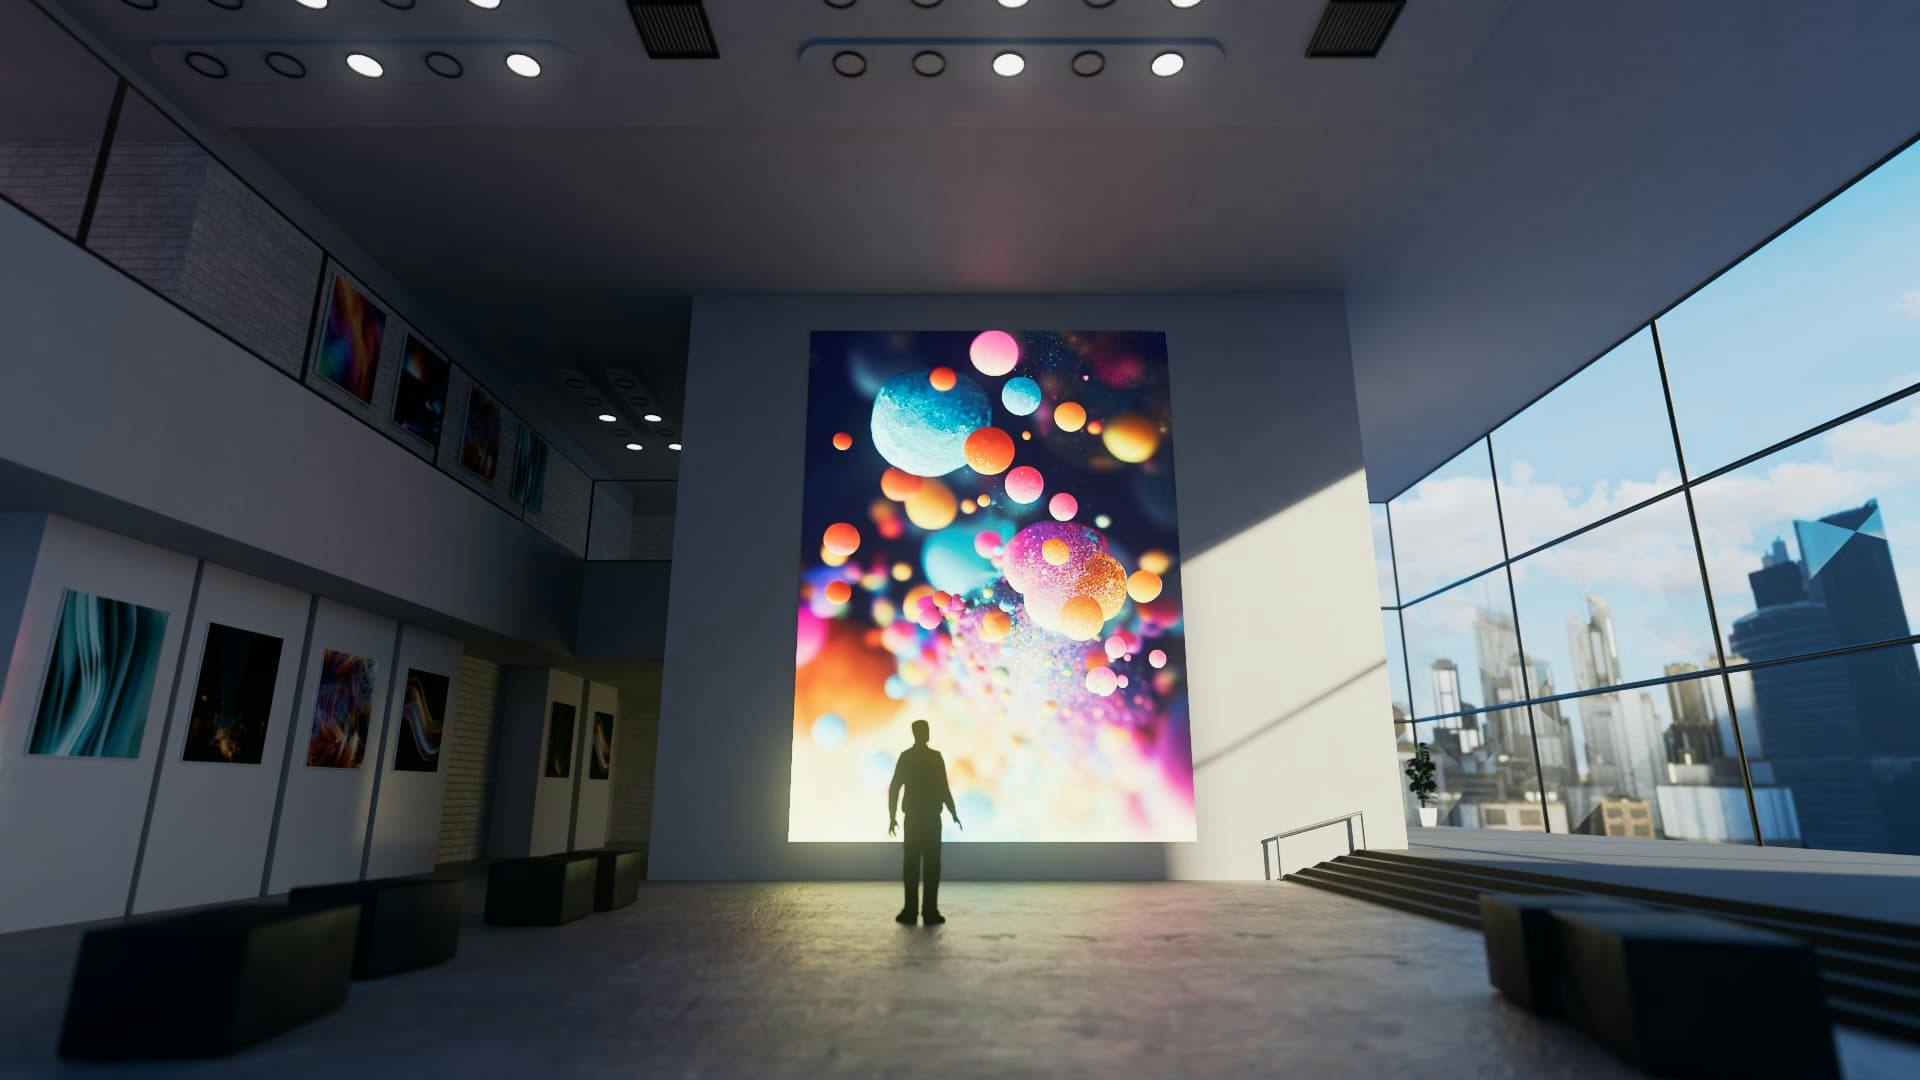 Art gallery with a large LED display in portrait orientaation showing sphere-based art, people are looking and admiring the art